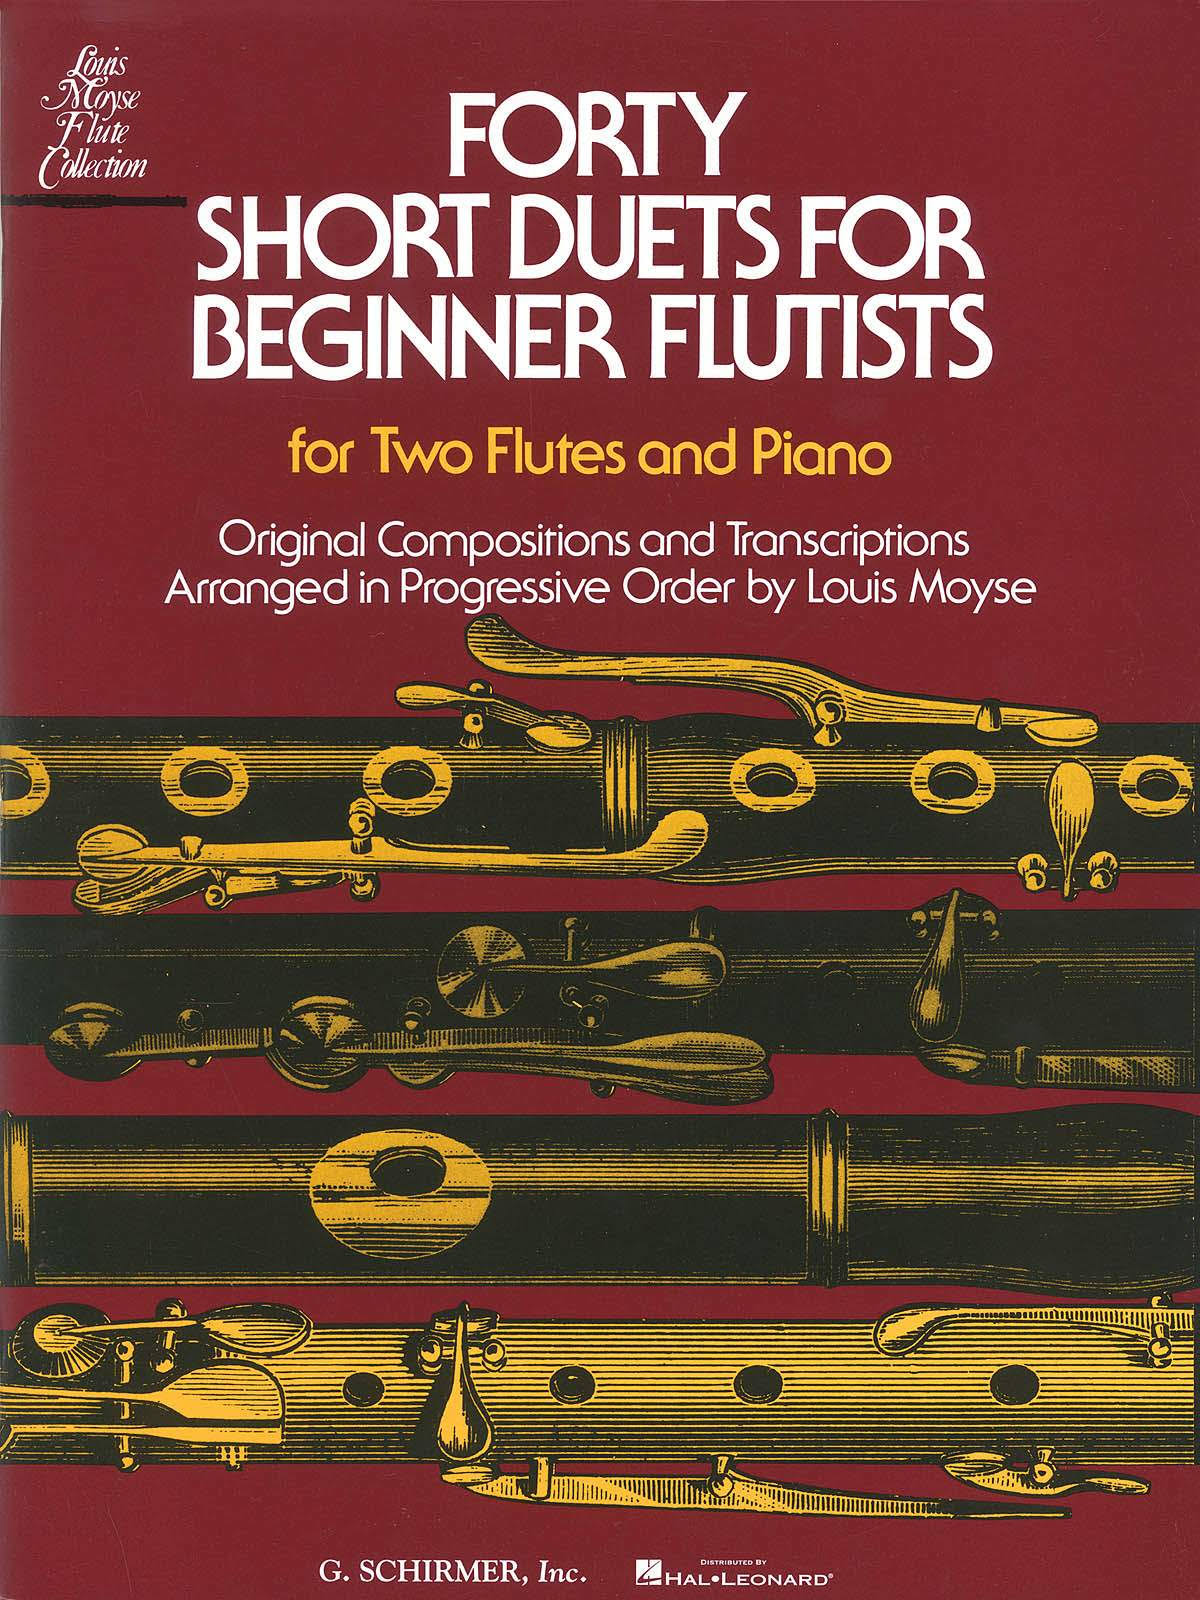 Forty Short Duets for Beginner Flutists: For Two Flutes and Piano - G. Schirmer